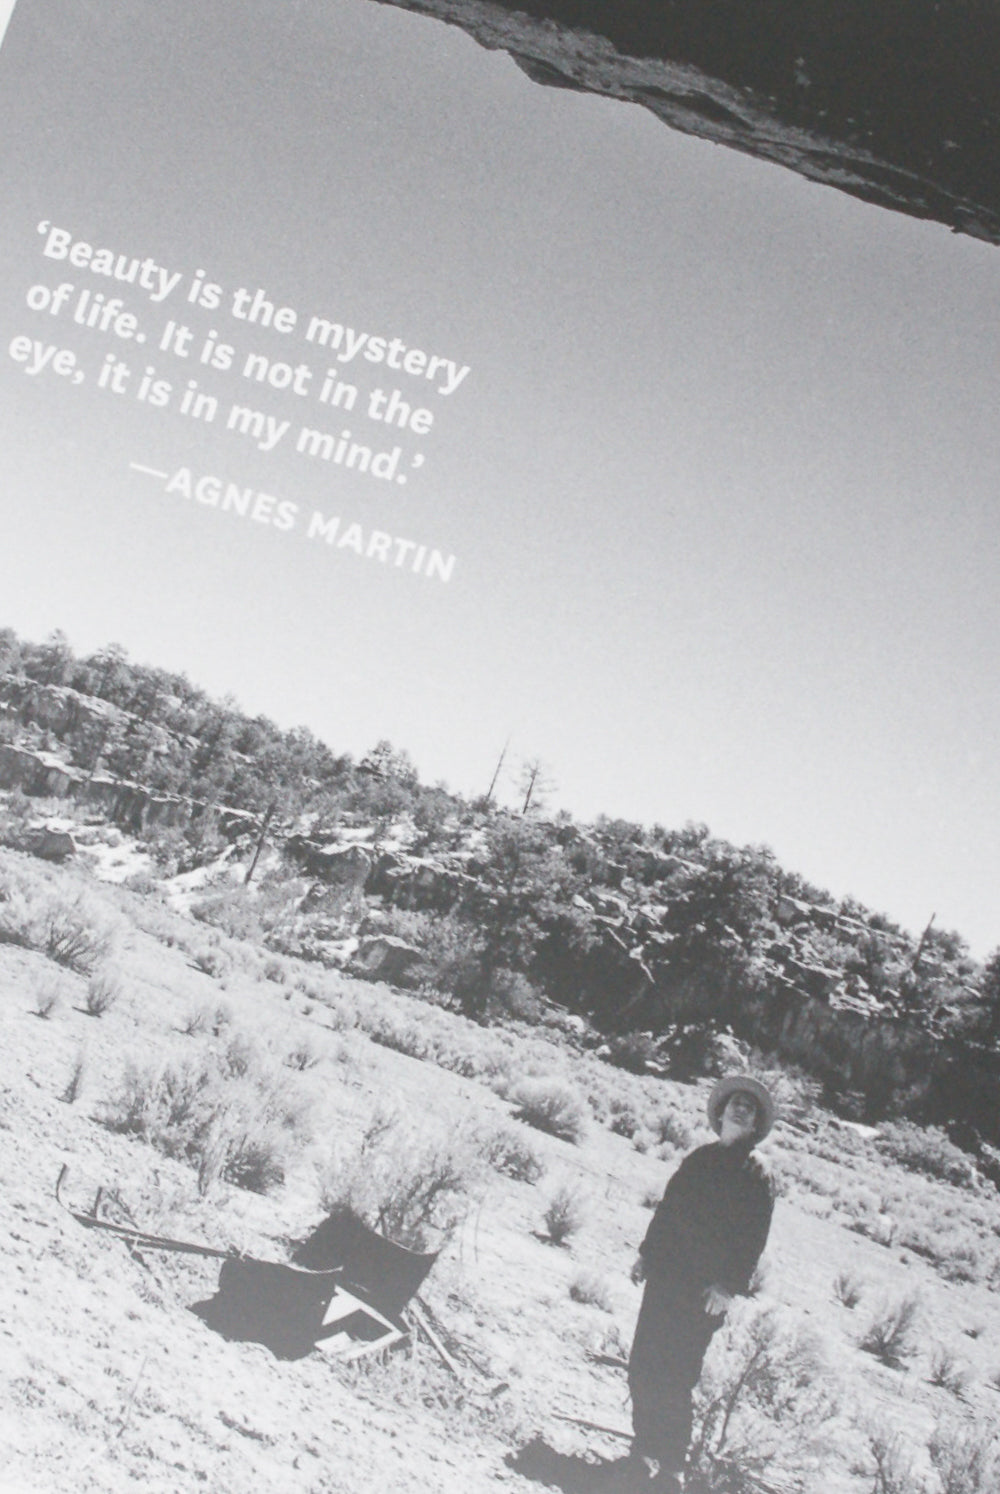 A black and white photo of a man in the desert with a quote from Agnes Martin captured in an Agnes Martin Artbook/D.A.P.